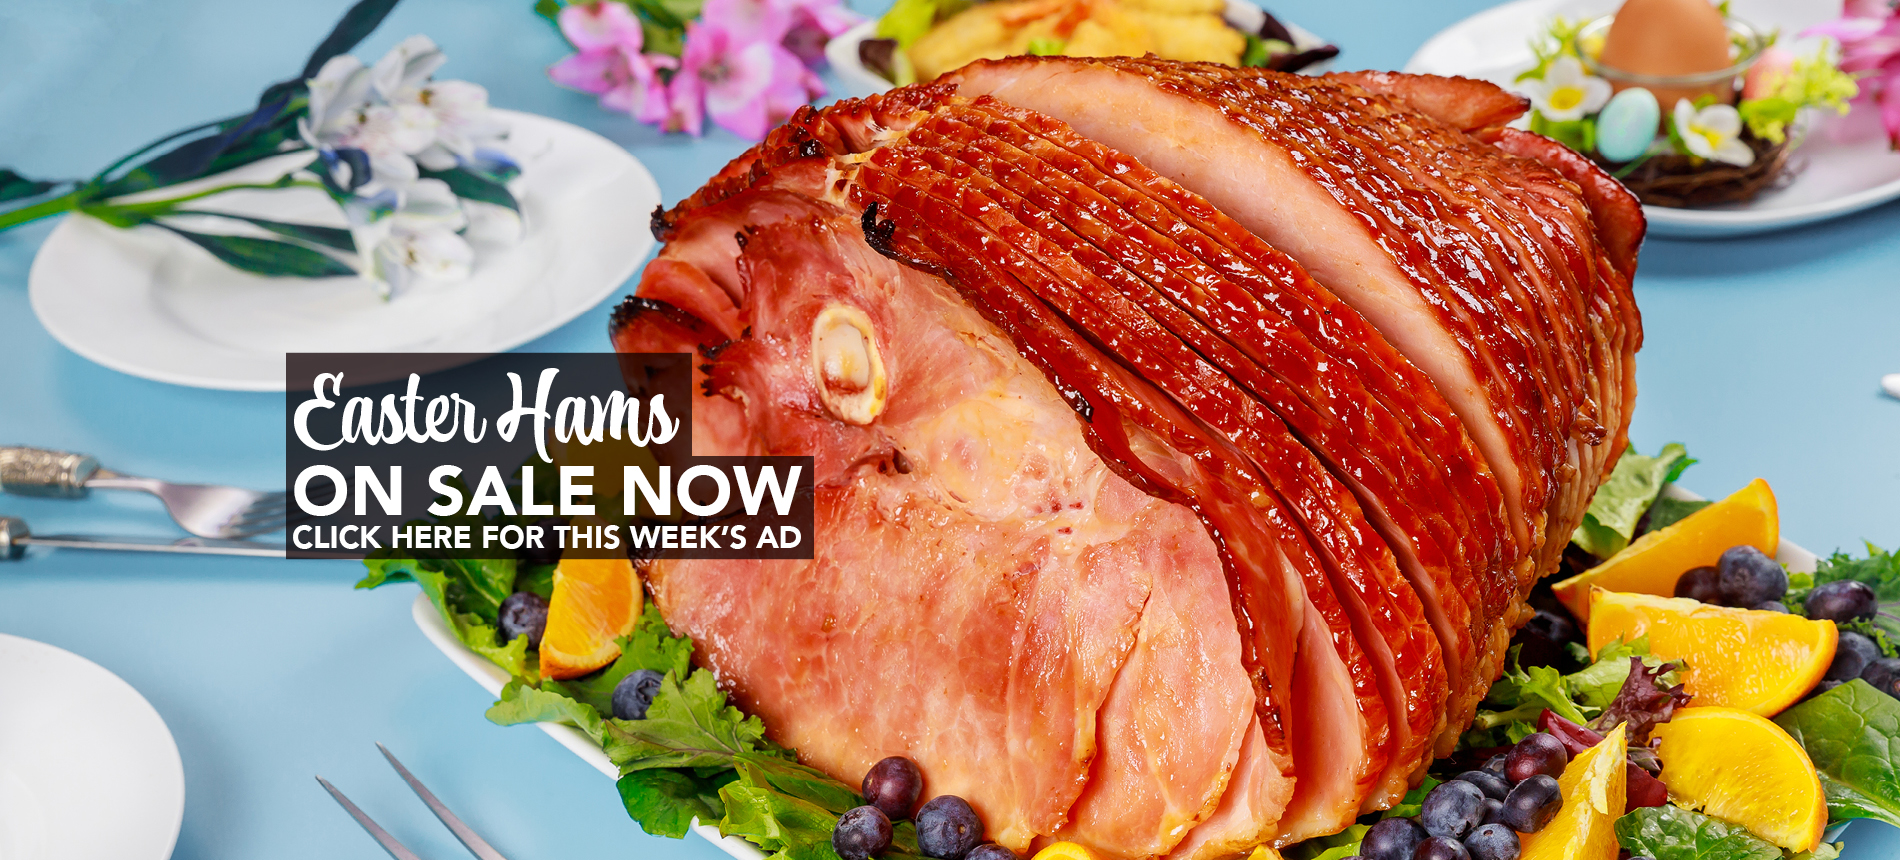 Easter Hams - On Sale Now